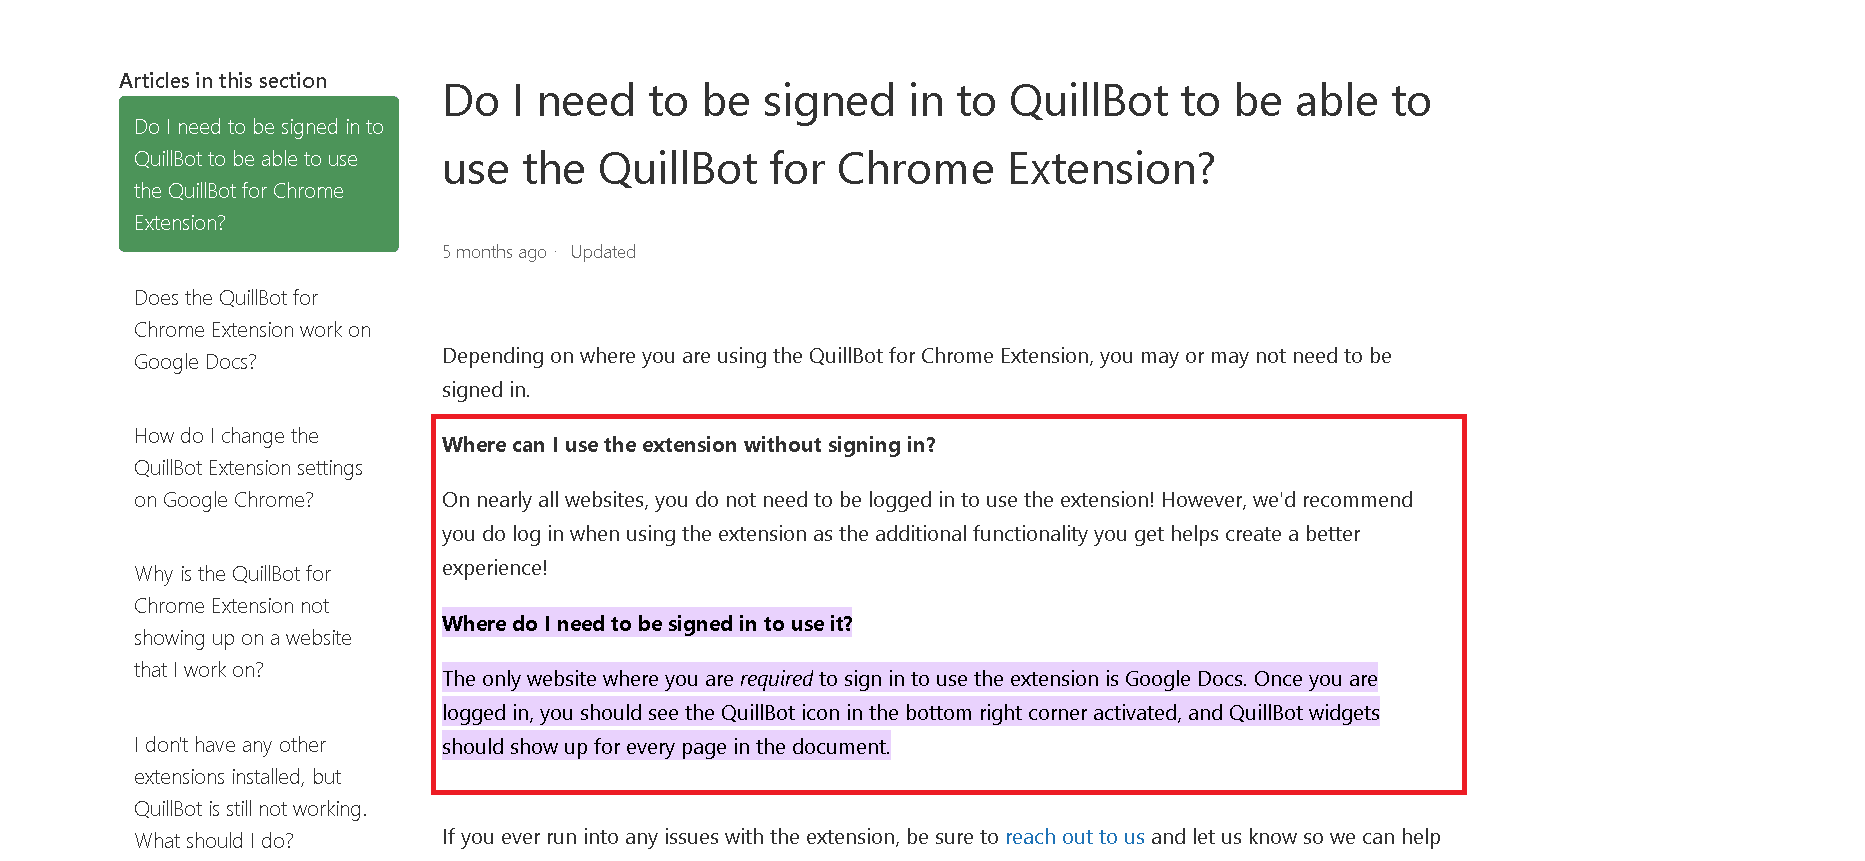 Do you need to be signed in to Quillbot to use the Quillbot Chrome and Word extensions?